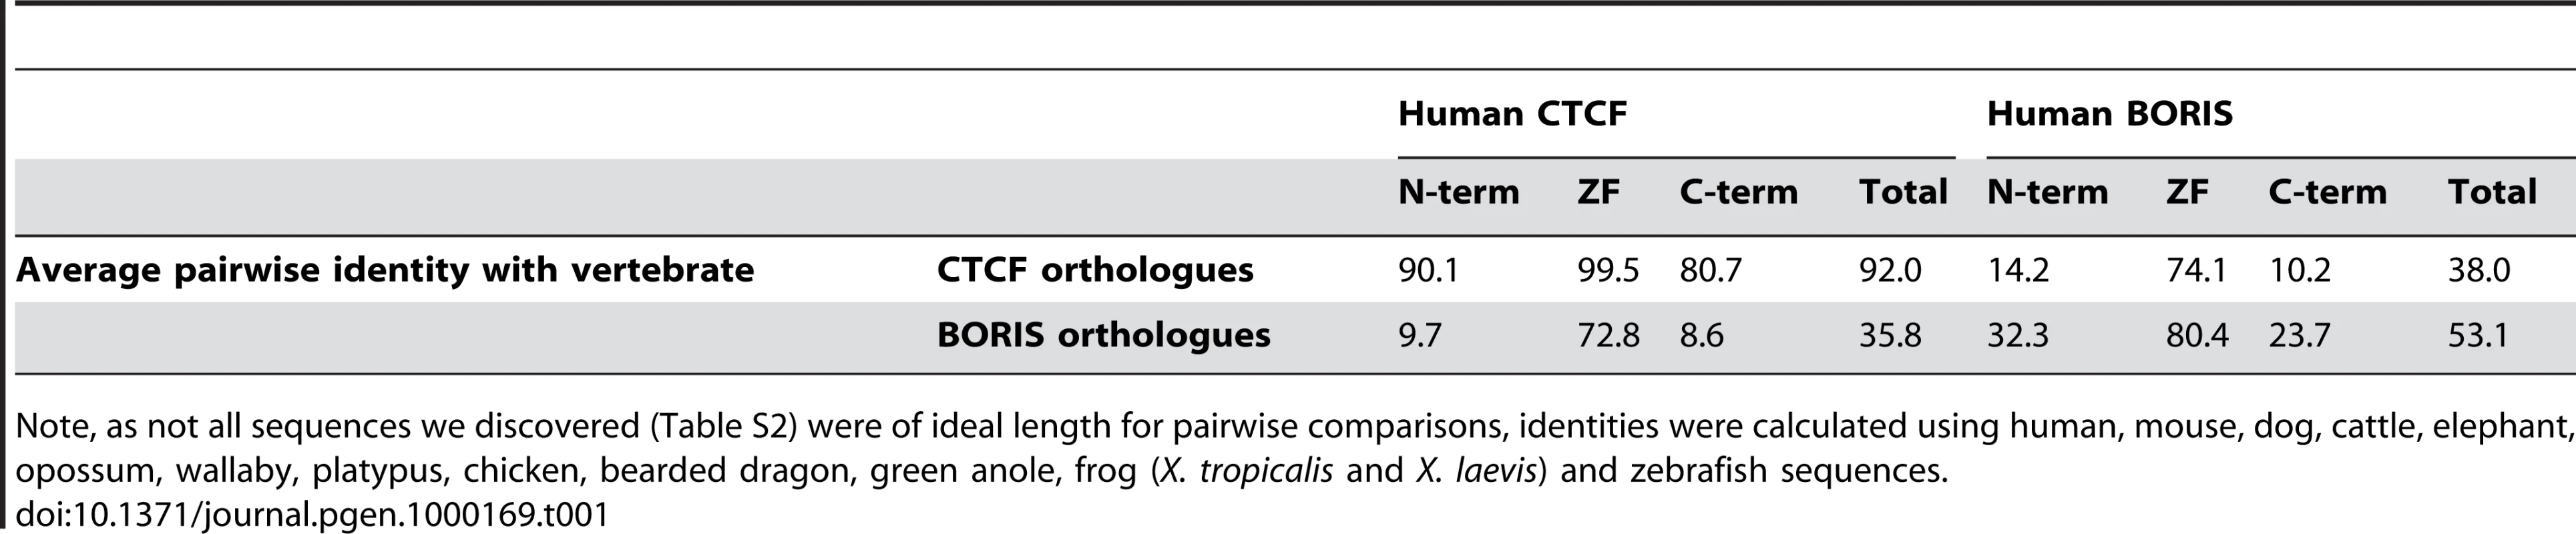 Average pairwise similarity (%) between regions of human CTCF/BORIS and other vertebrate orthologues.